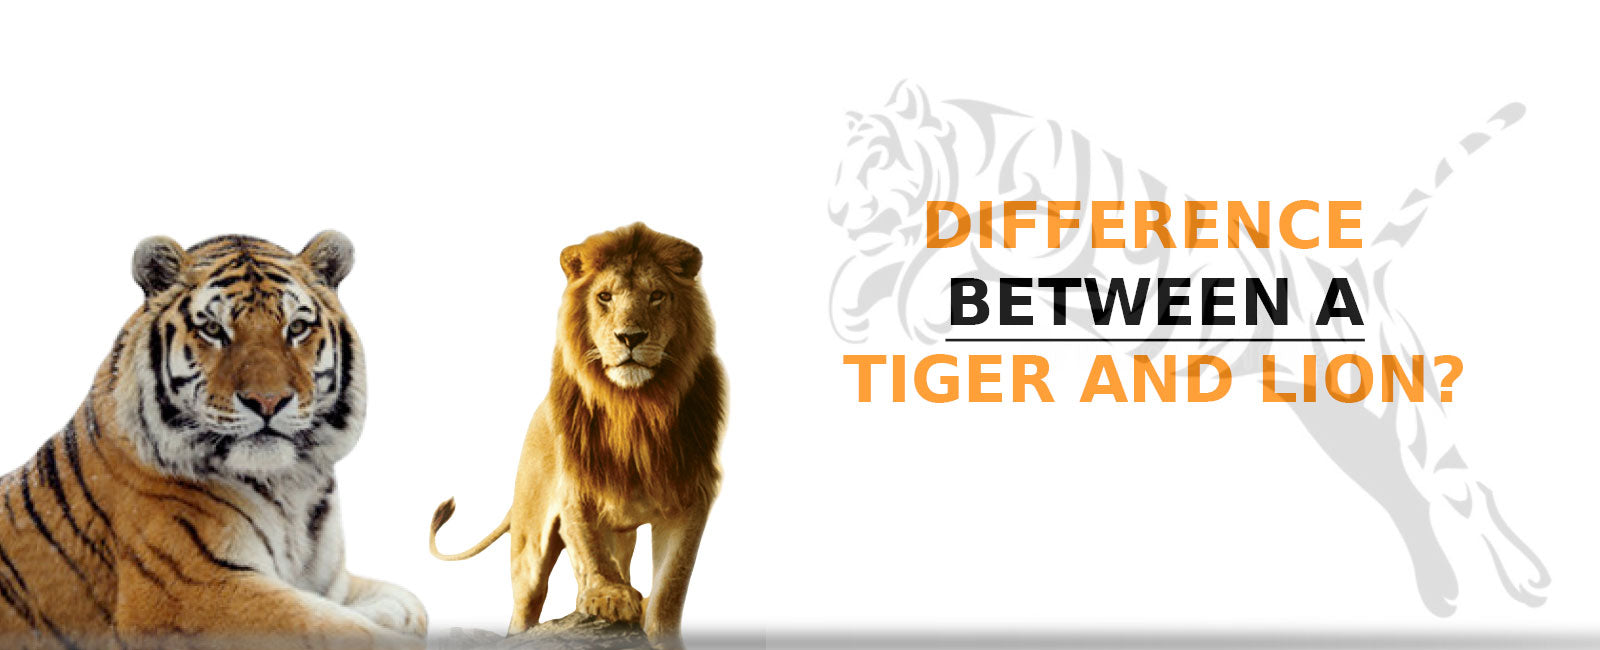 What Is the Difference Between a Lion and a Tiger?